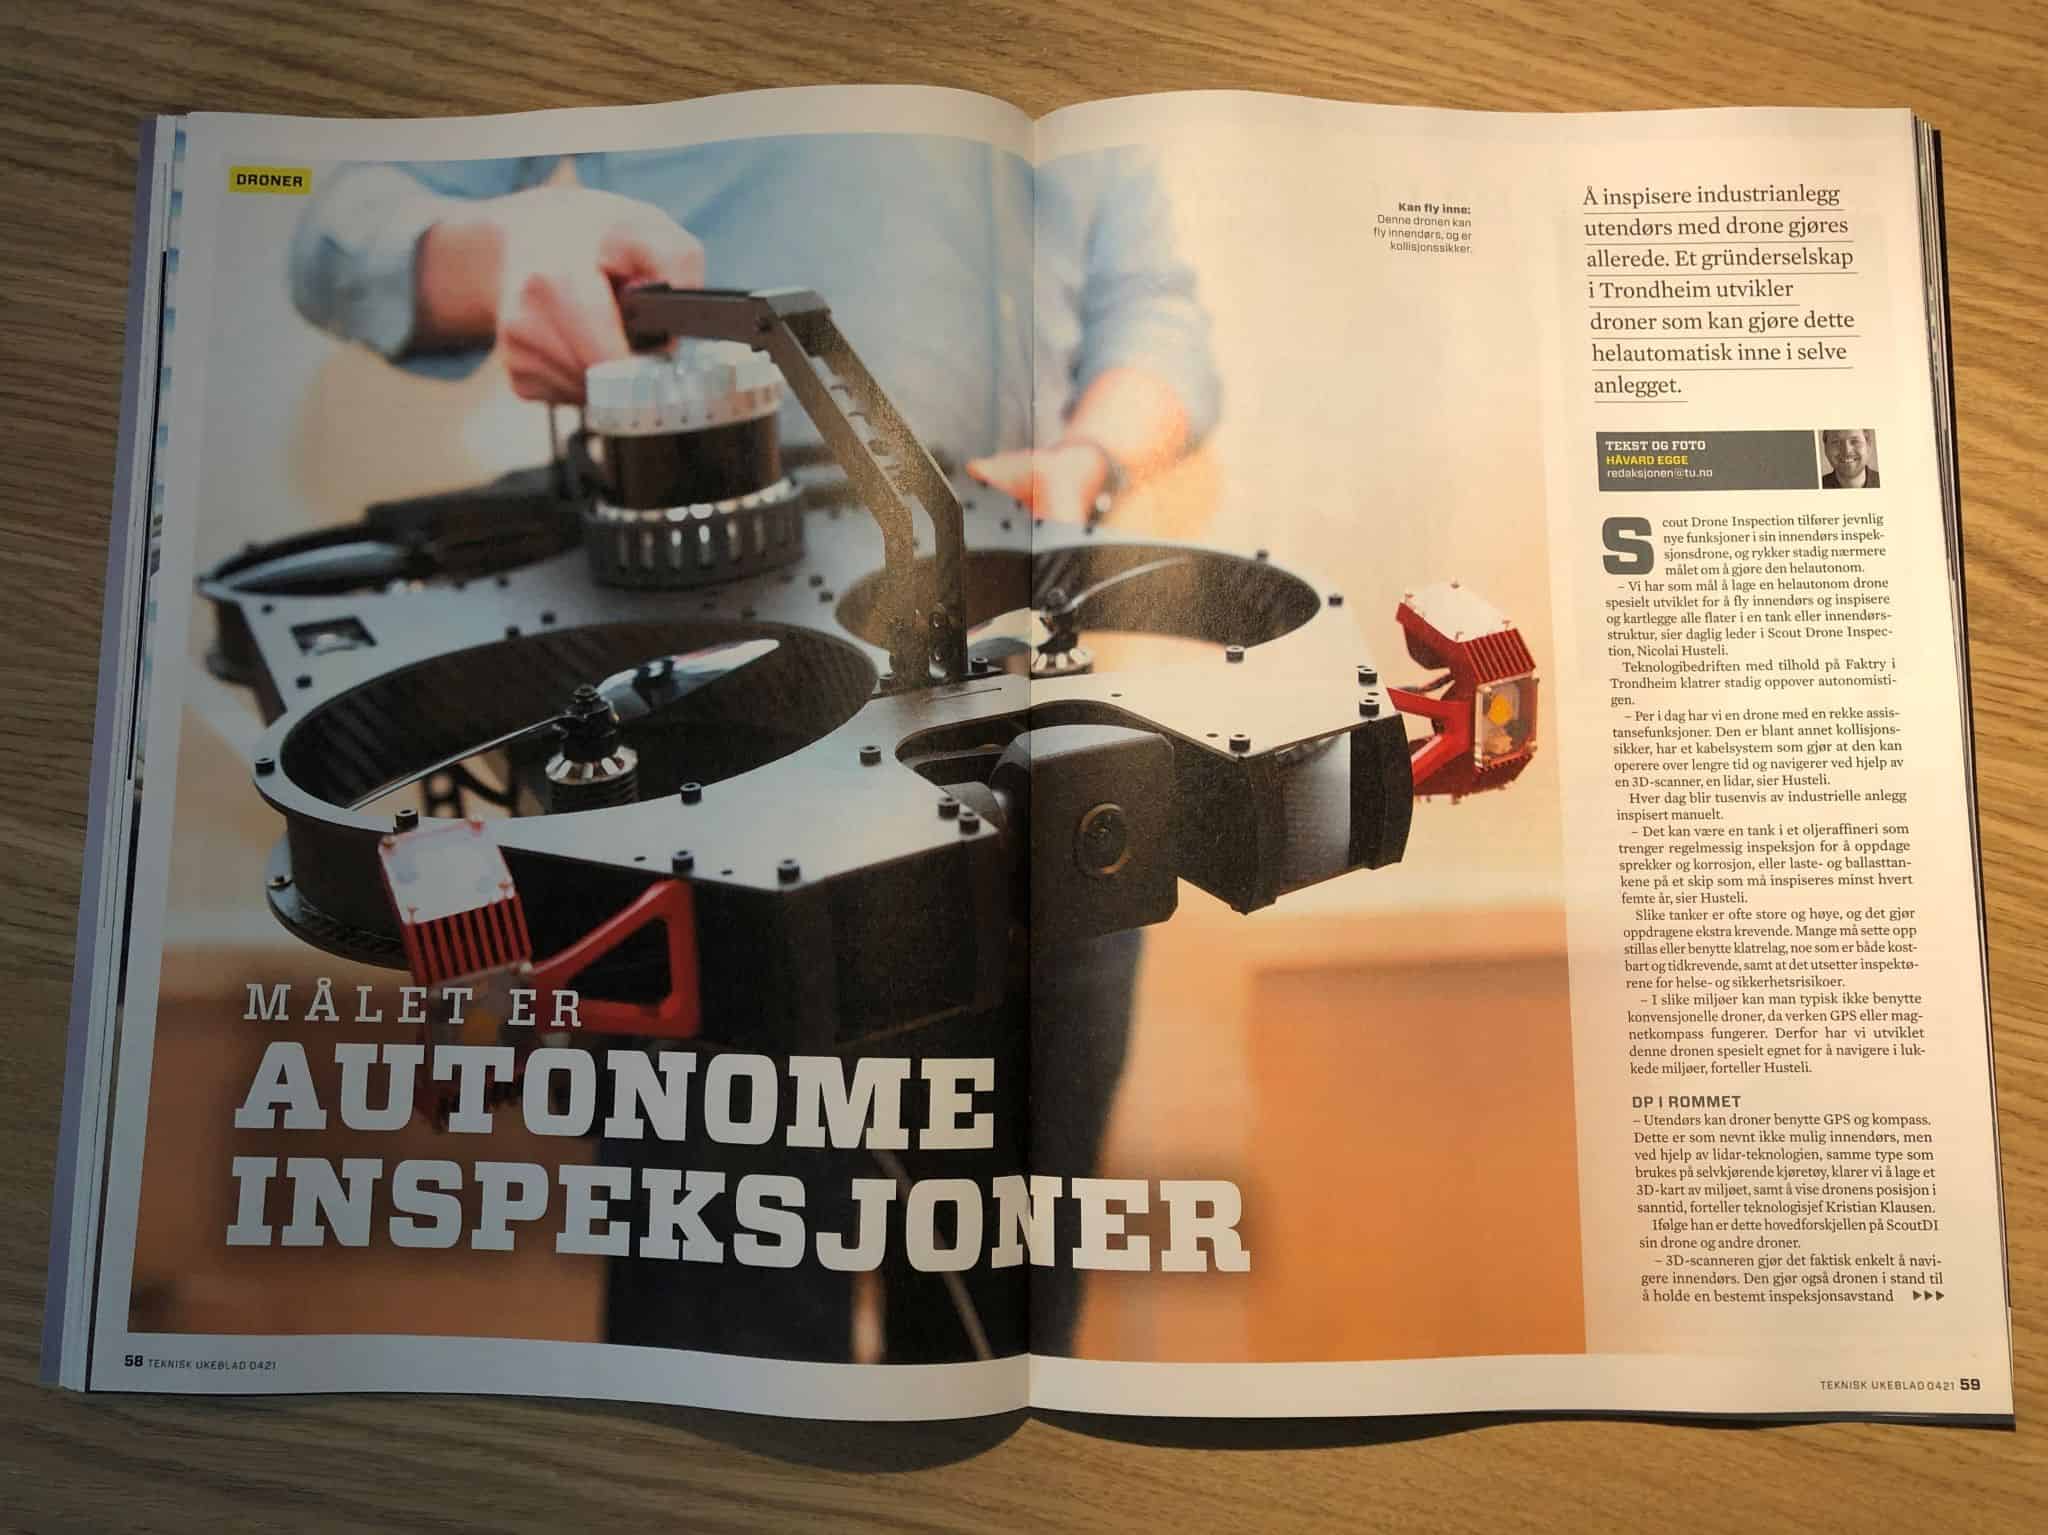 We are featured in the last issue of Teknisk Ukeblad